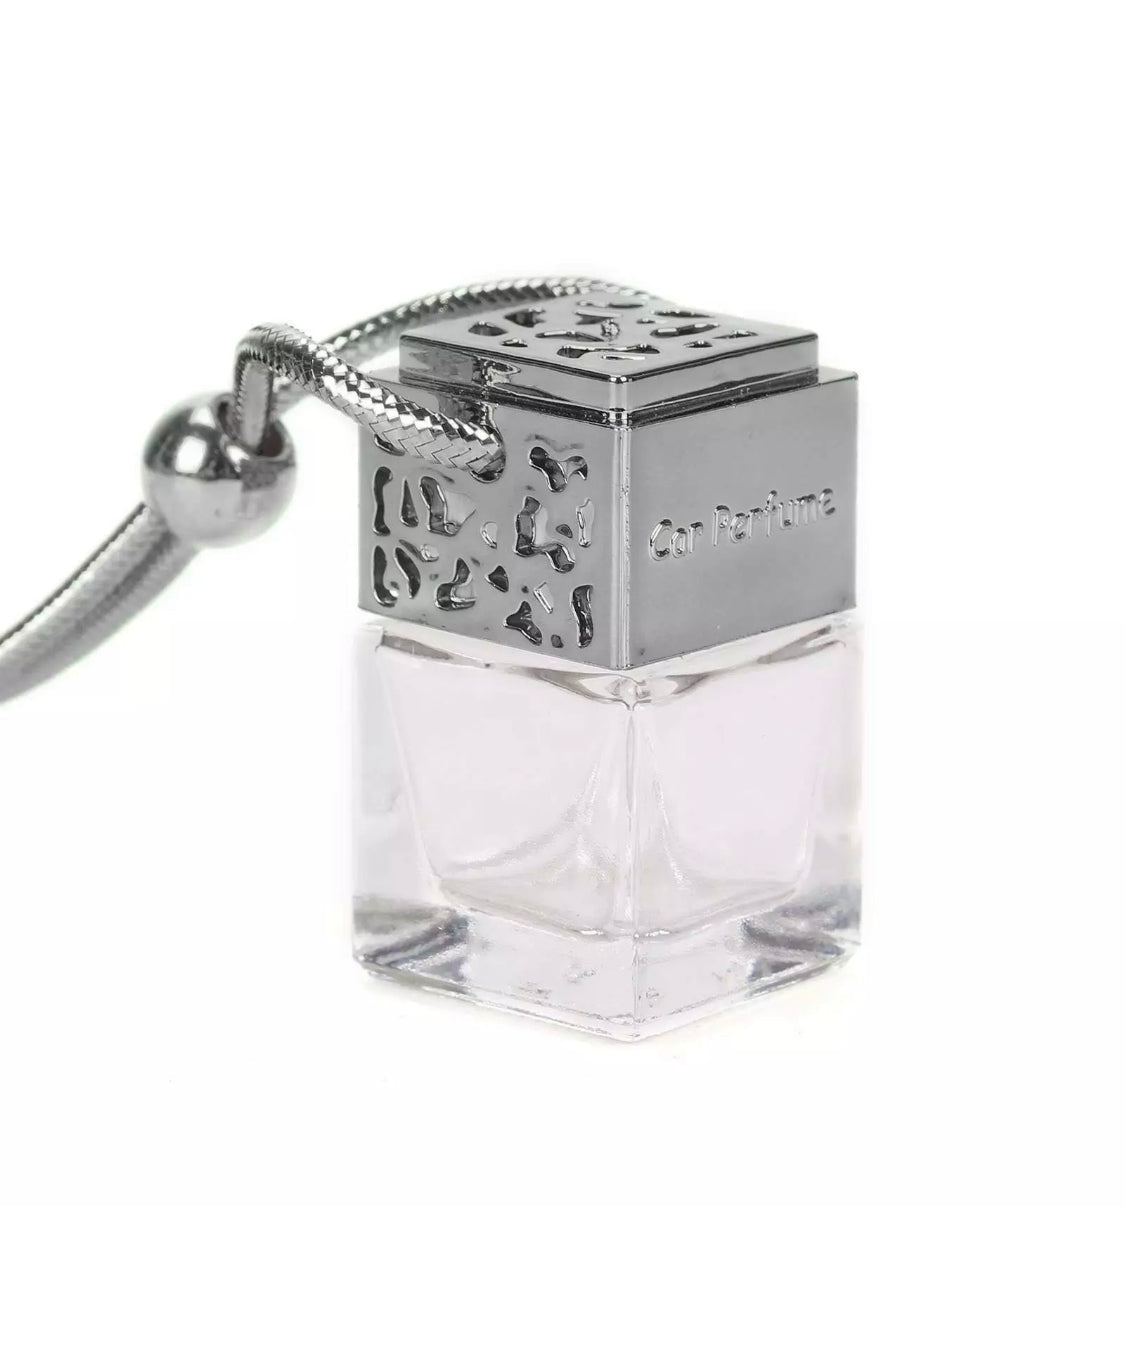 PRECIOUS OUD SILVER DESIGNER CAR DIFFUSER 8ml BRAND NEW PRODUCT LIMITED EDITION